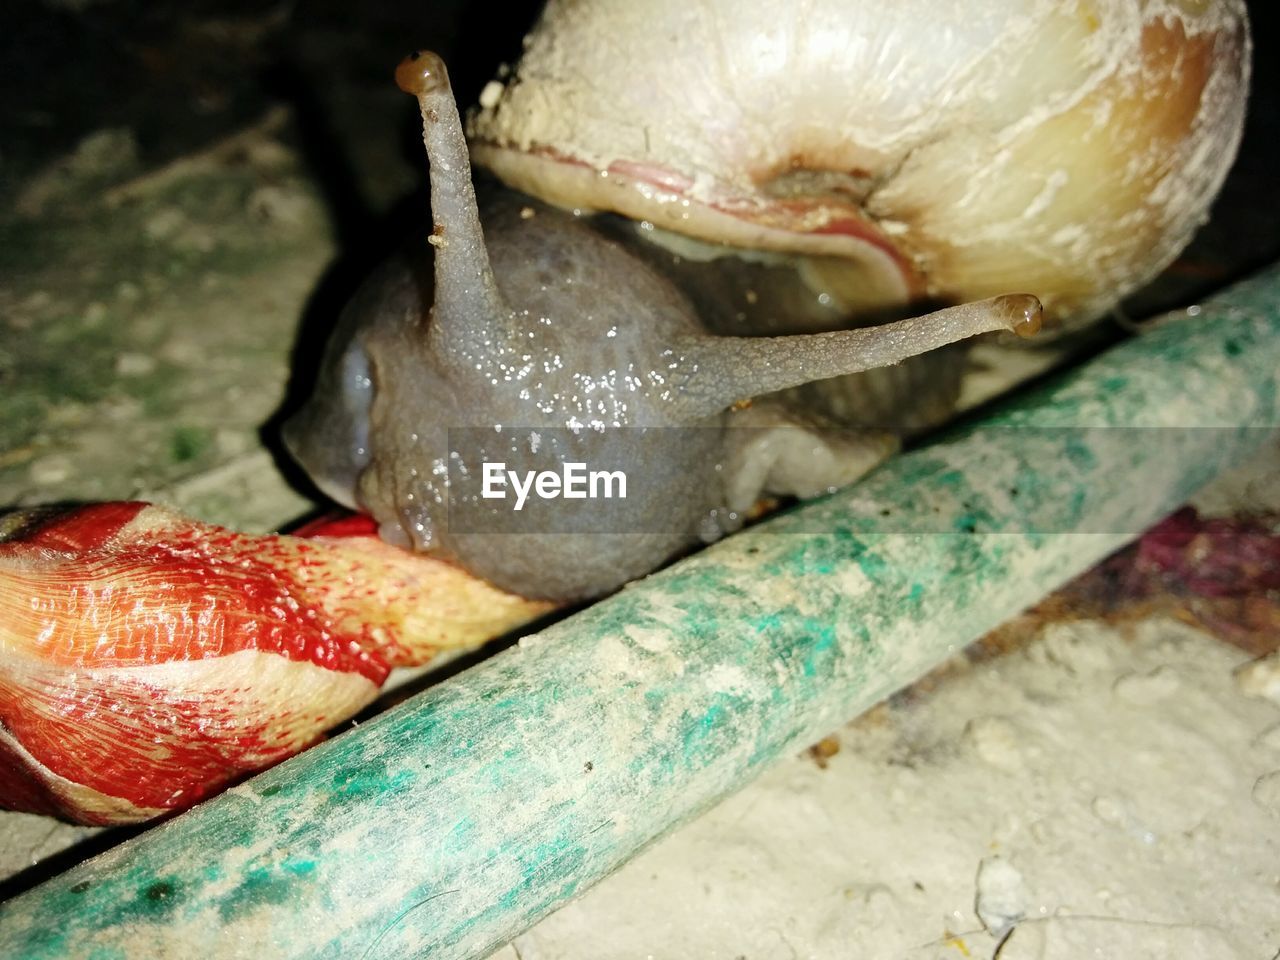 Close-up of snail by pipe